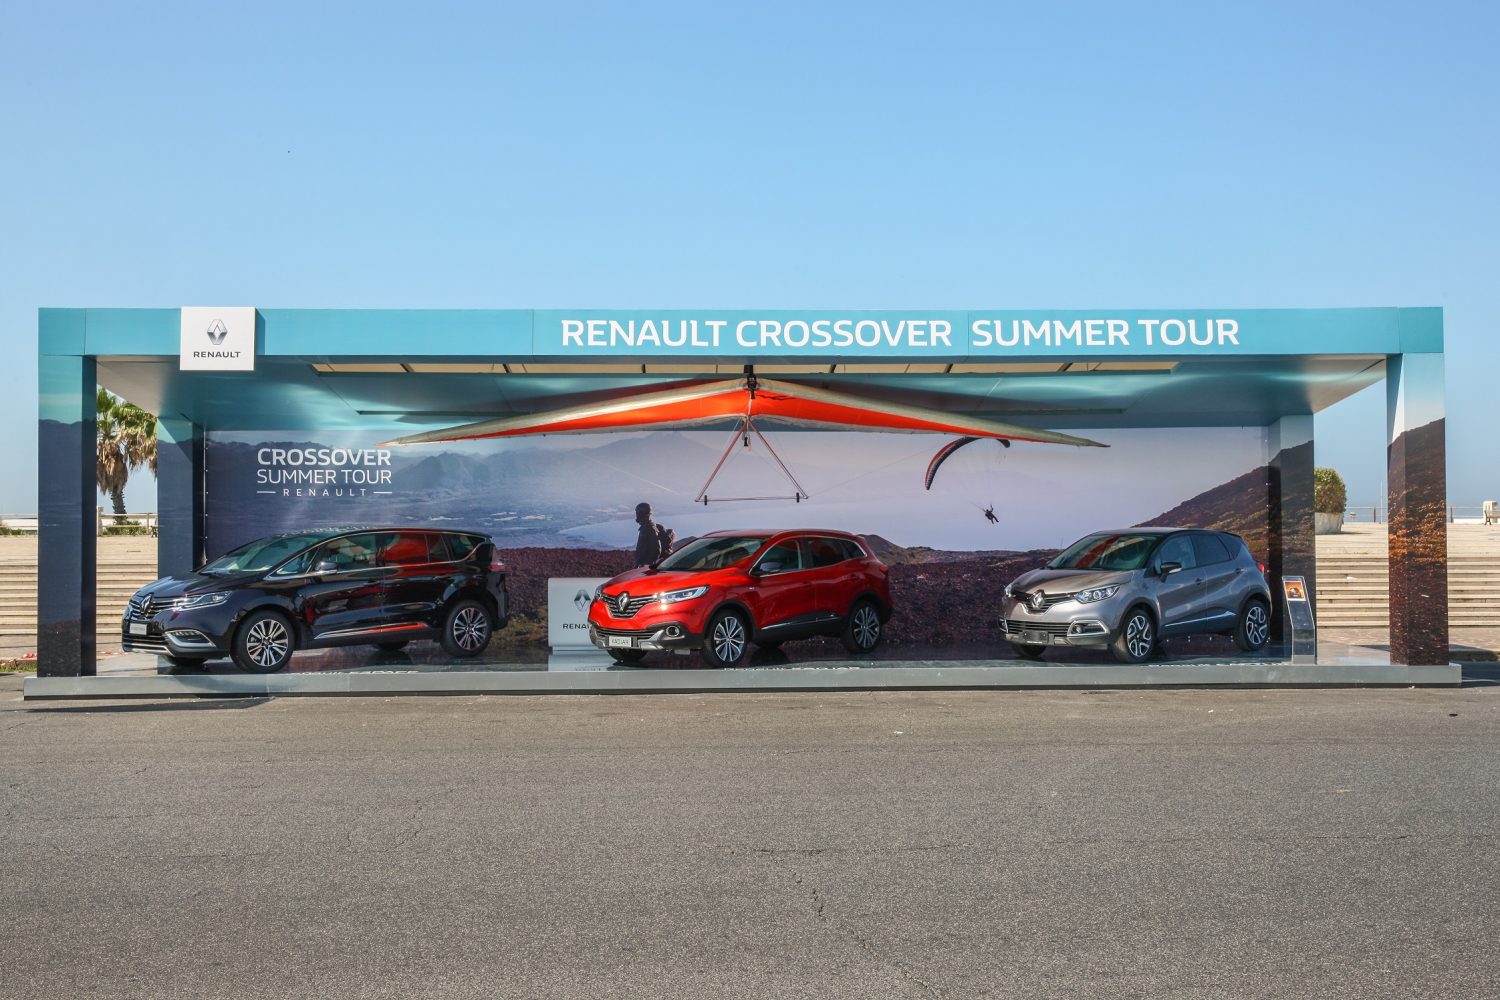 Renault Crossover Summer Tour